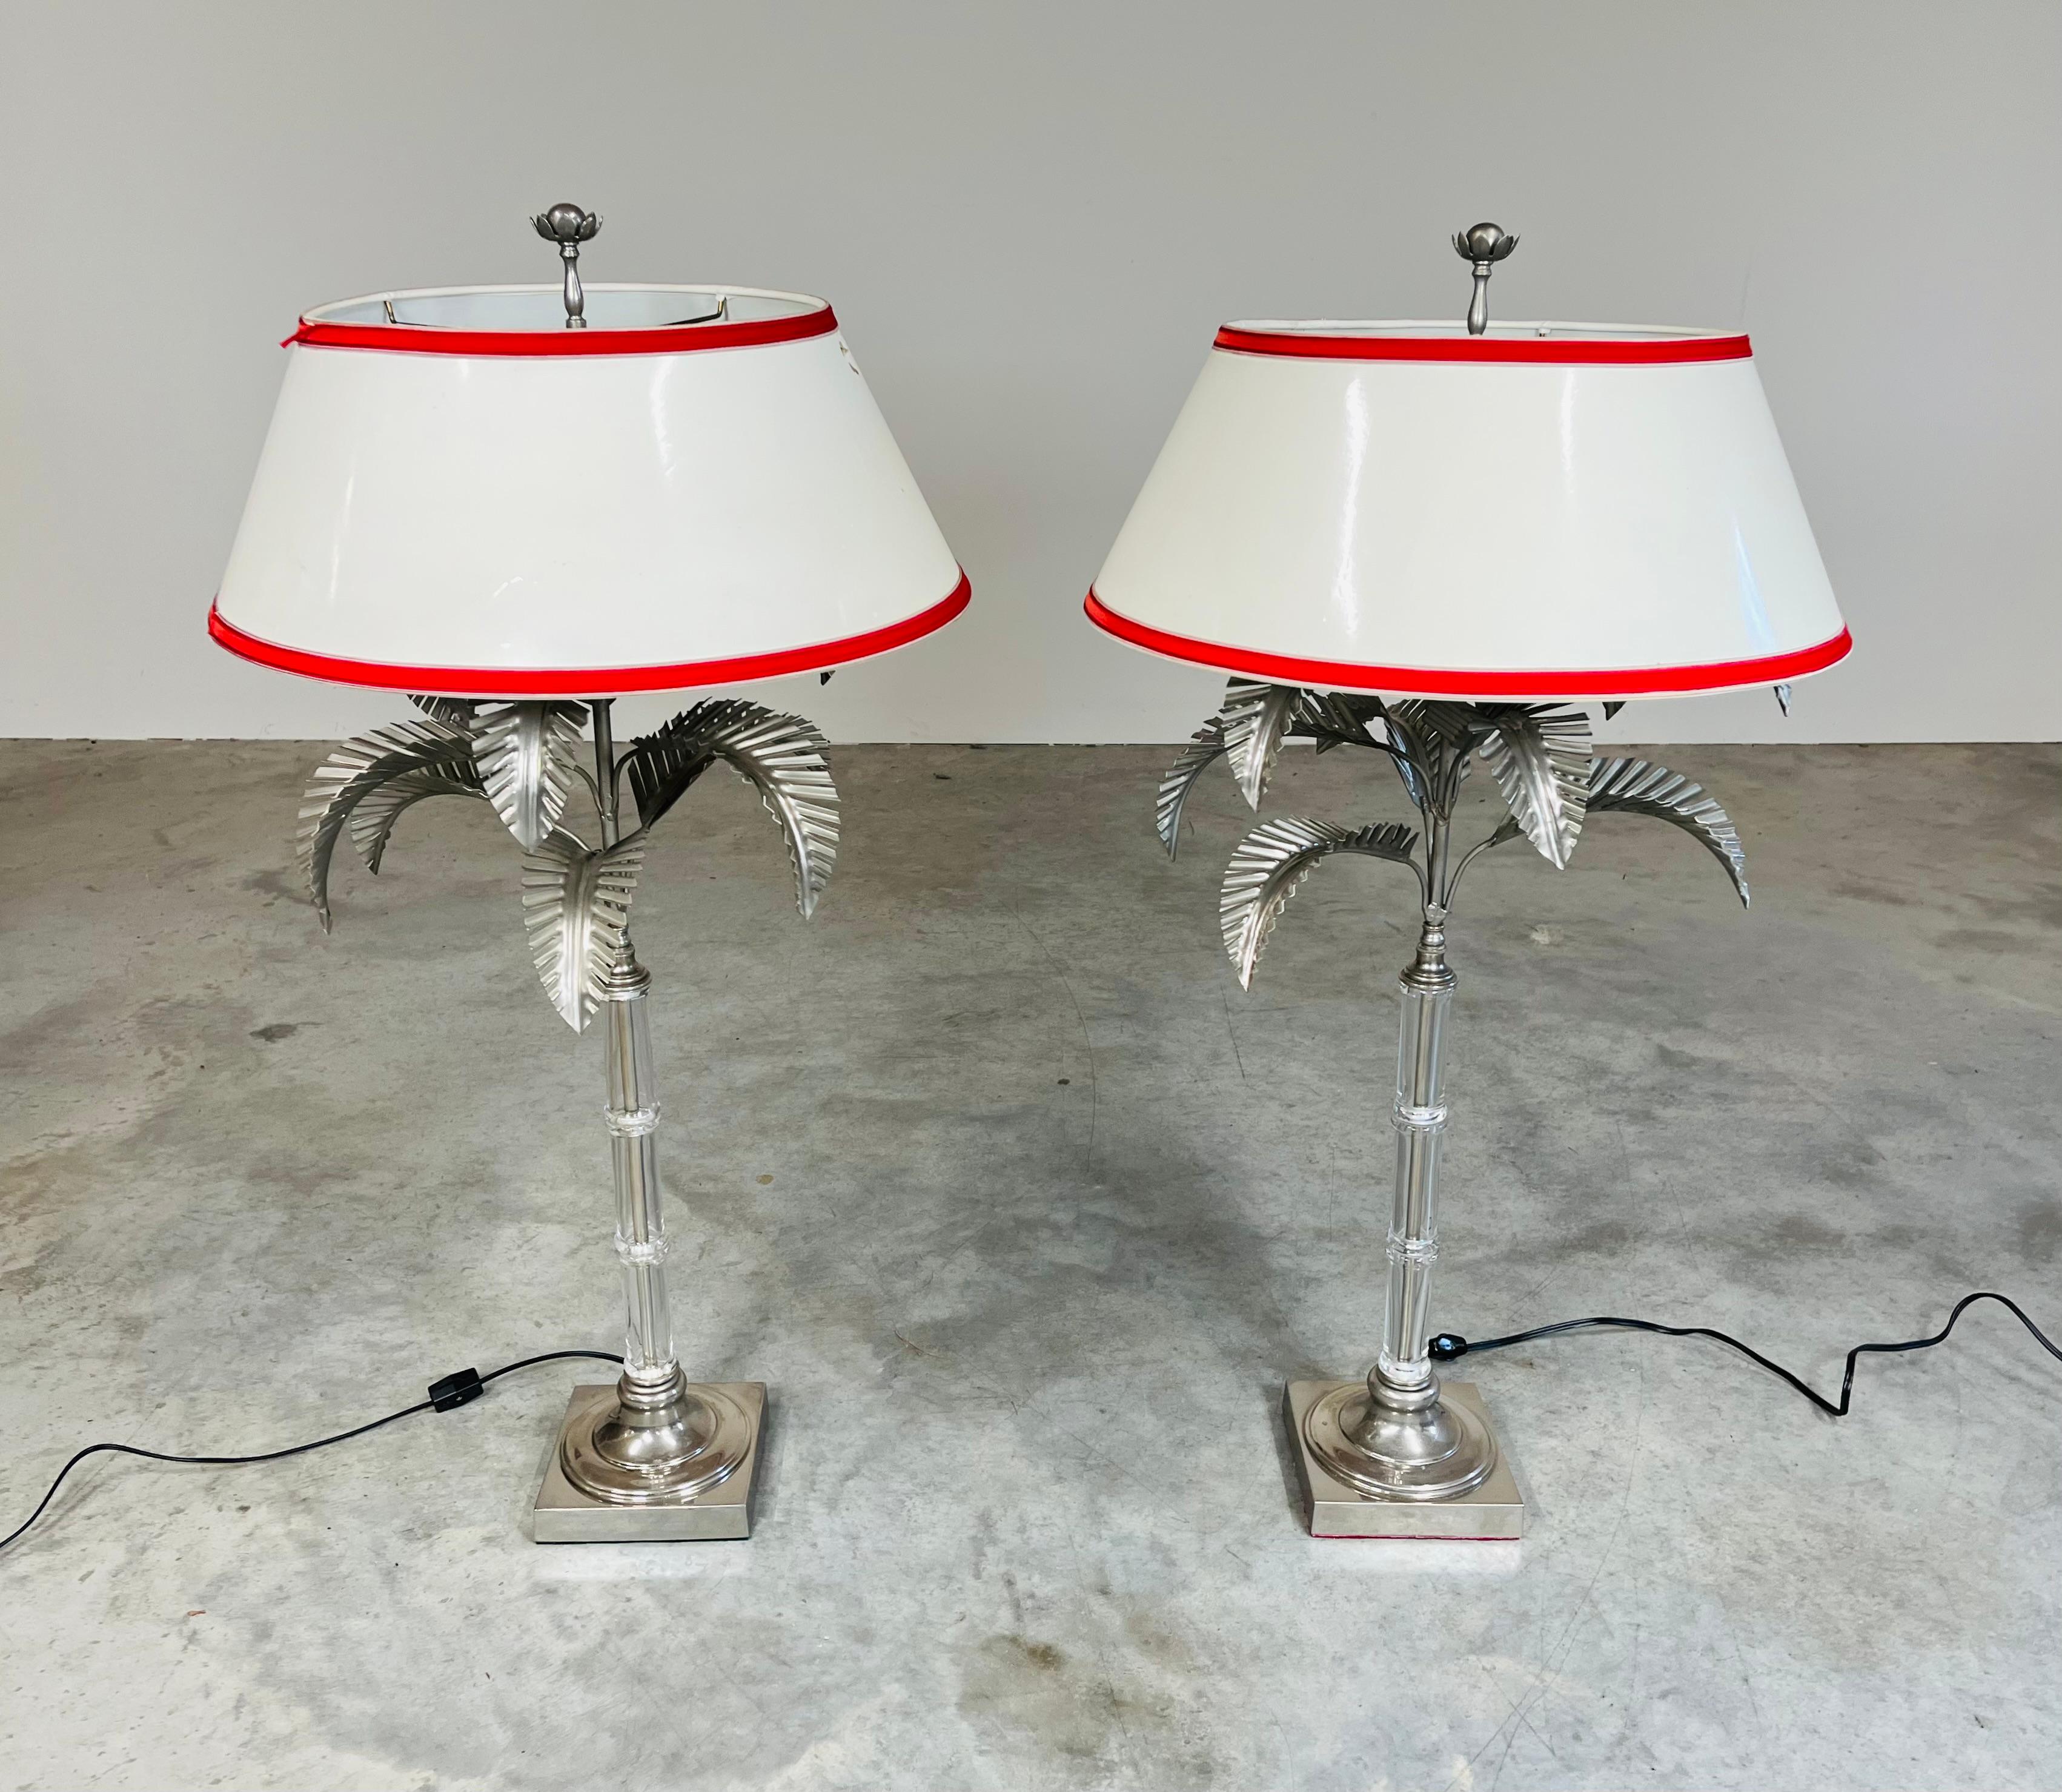 Pair of elegant faux bamboo glass stem lamps having brushed nickel palm leaves and bases with original matching detailed finials by Chapman circa 1970. 
In very nice vintage condition with new wiring having 1970’s style plugs to complete the look.